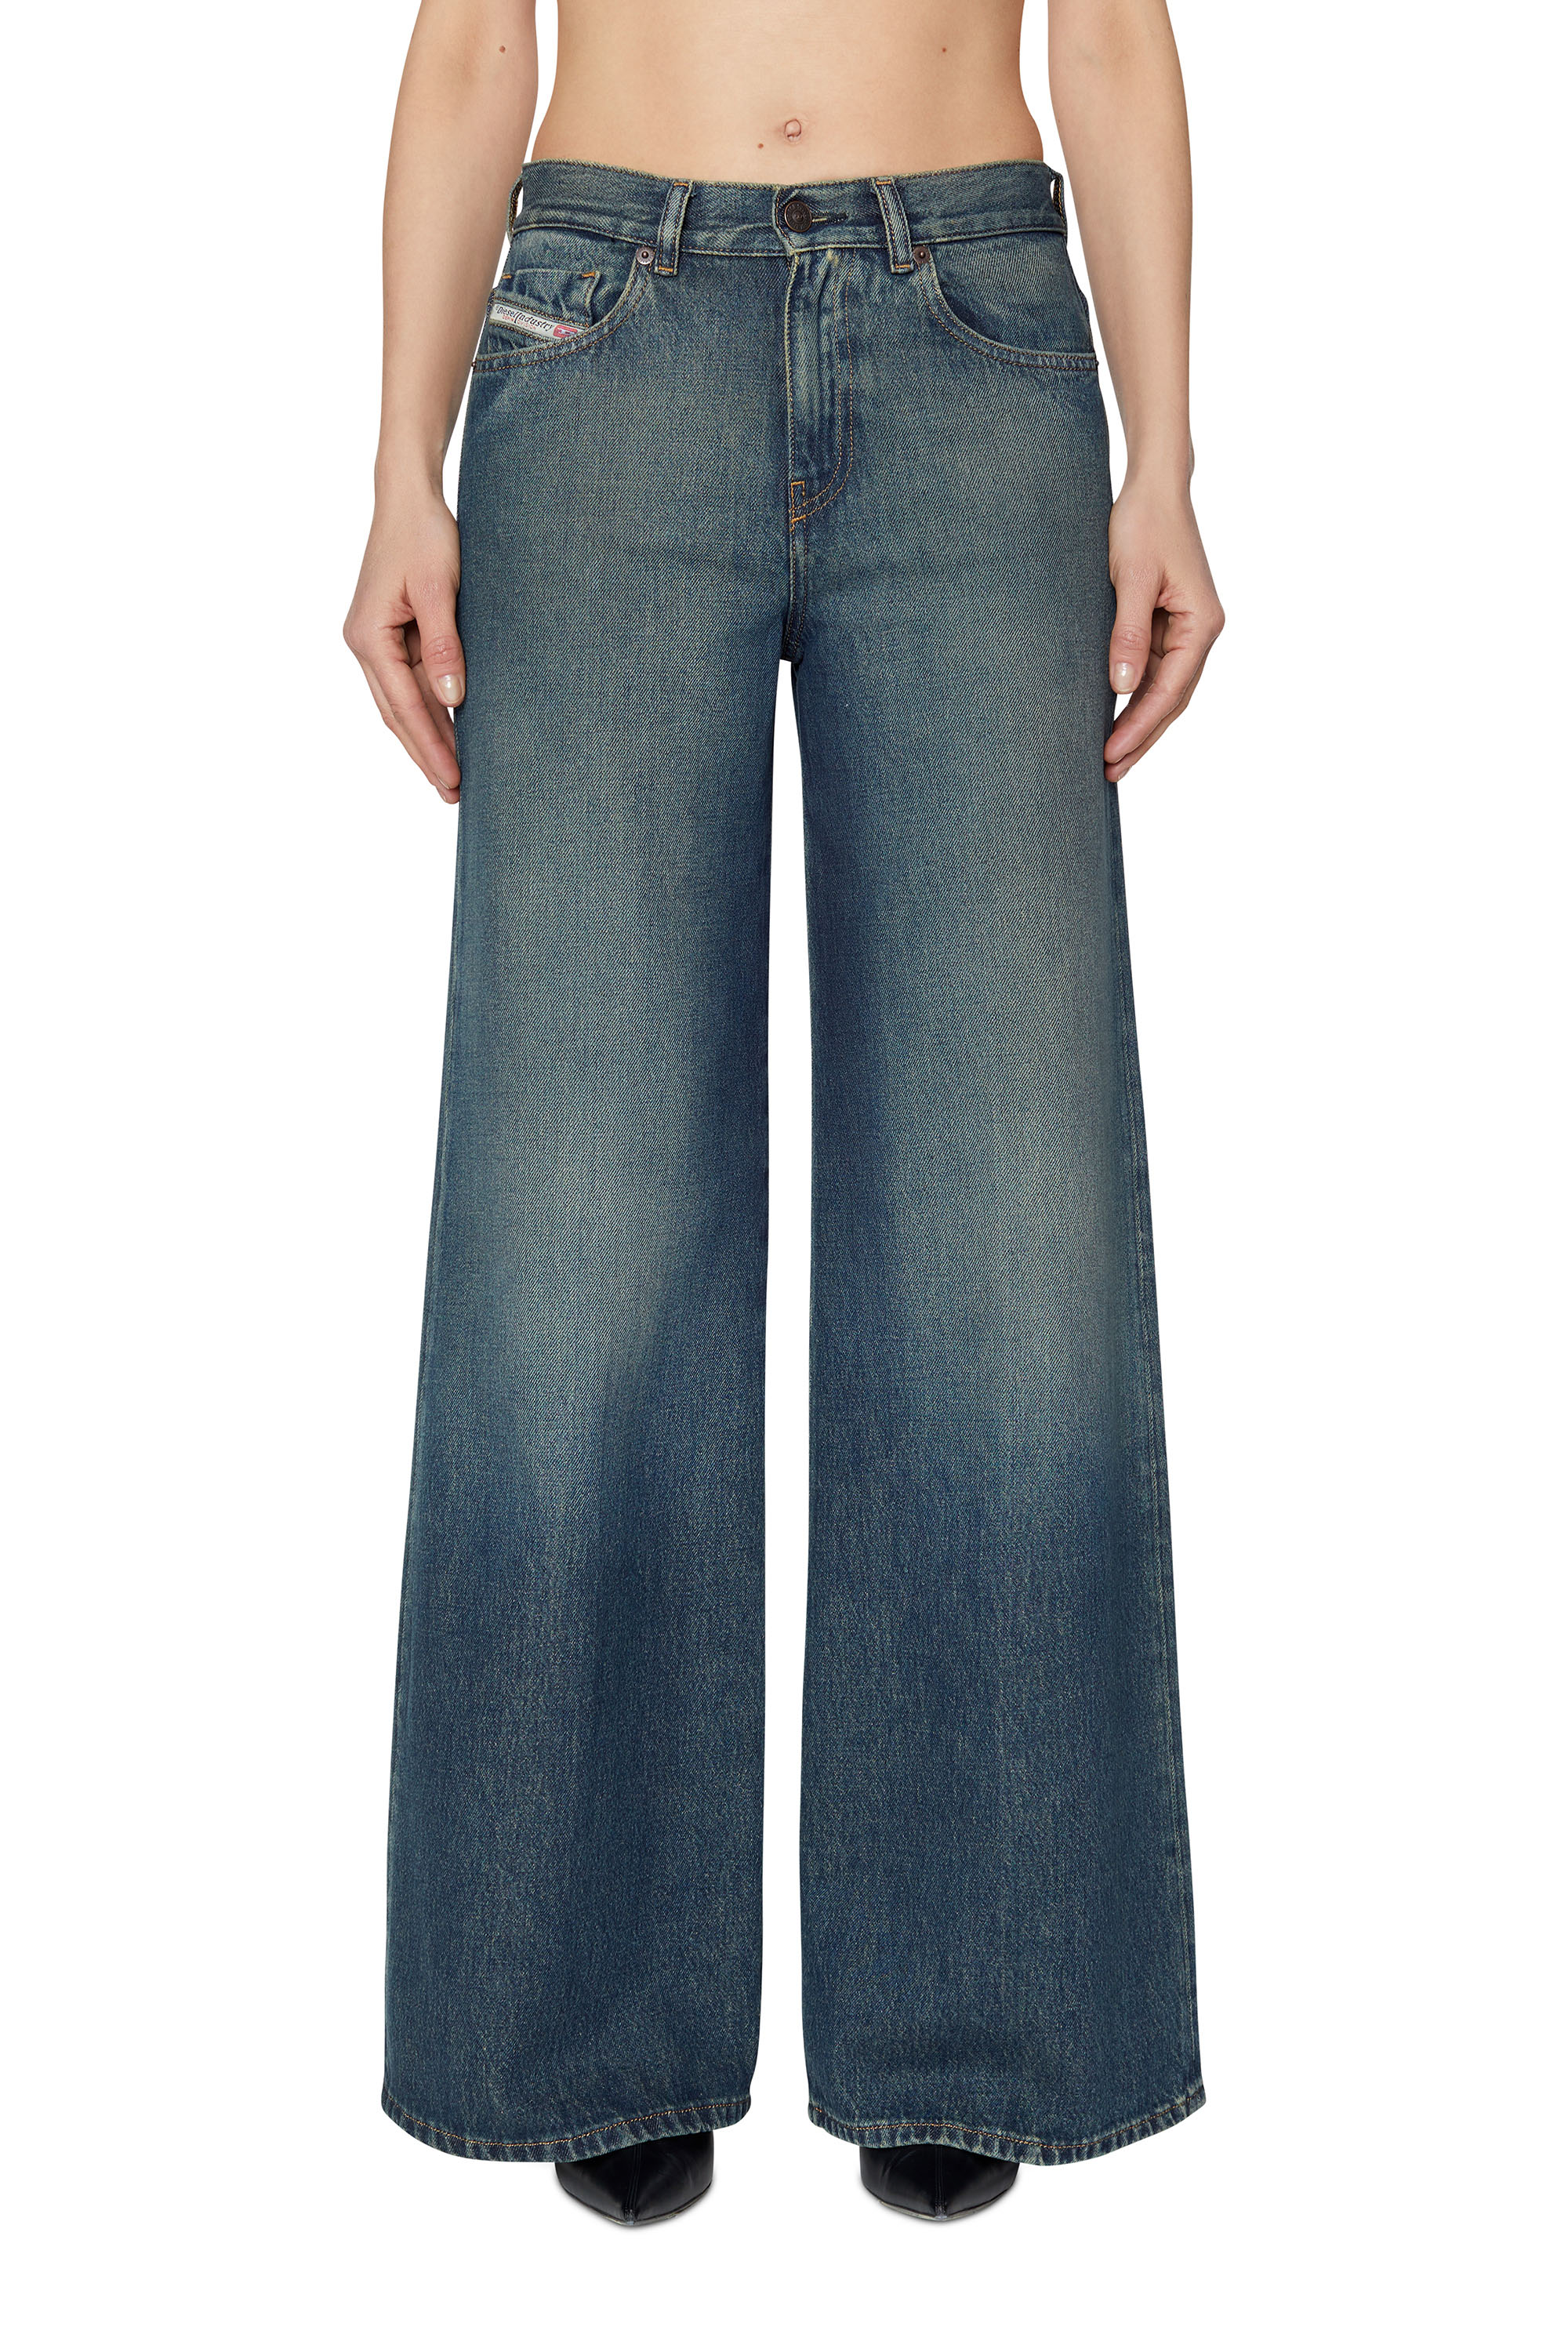 Diesel - 1978 09C04 Bootcut and Flare Jeans,  - Image 1